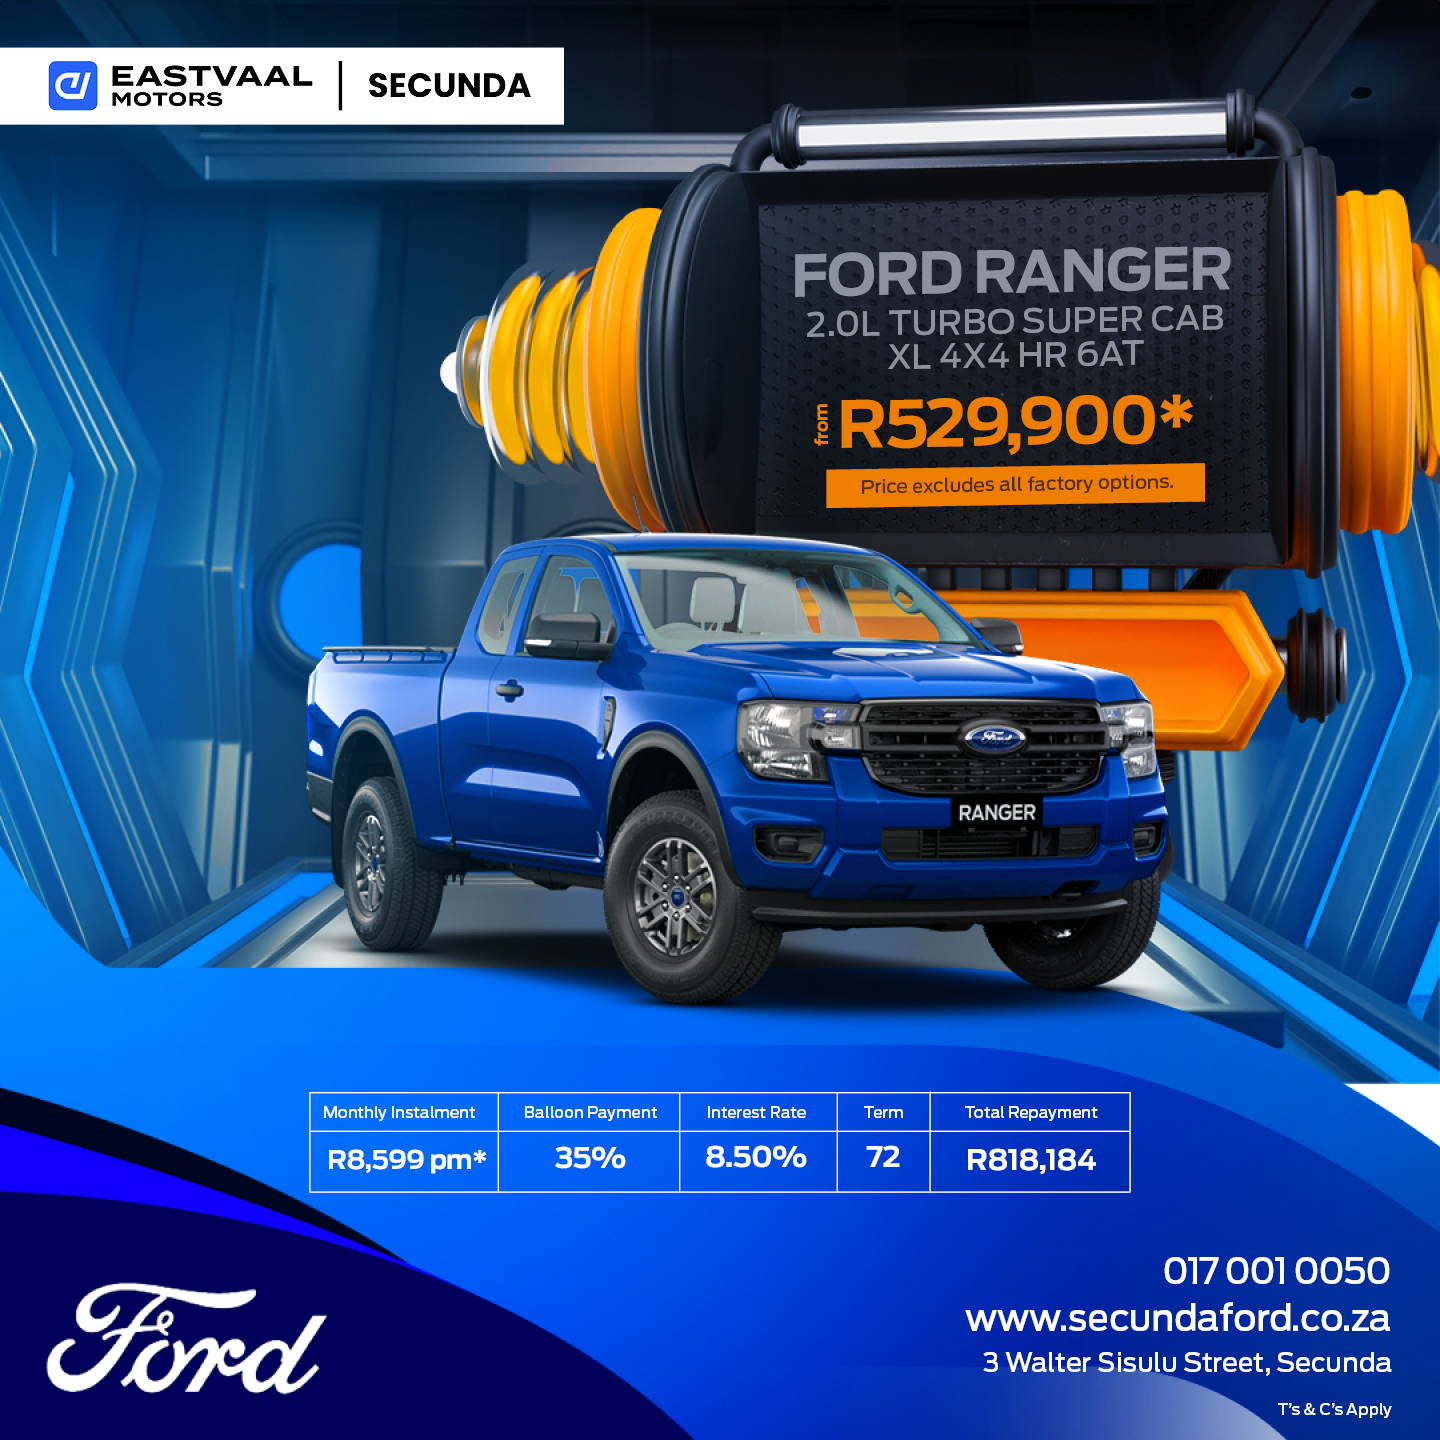 Ford Ranger 2.0L Turbo Super Cab XL 4X4 HR 6AT image from 